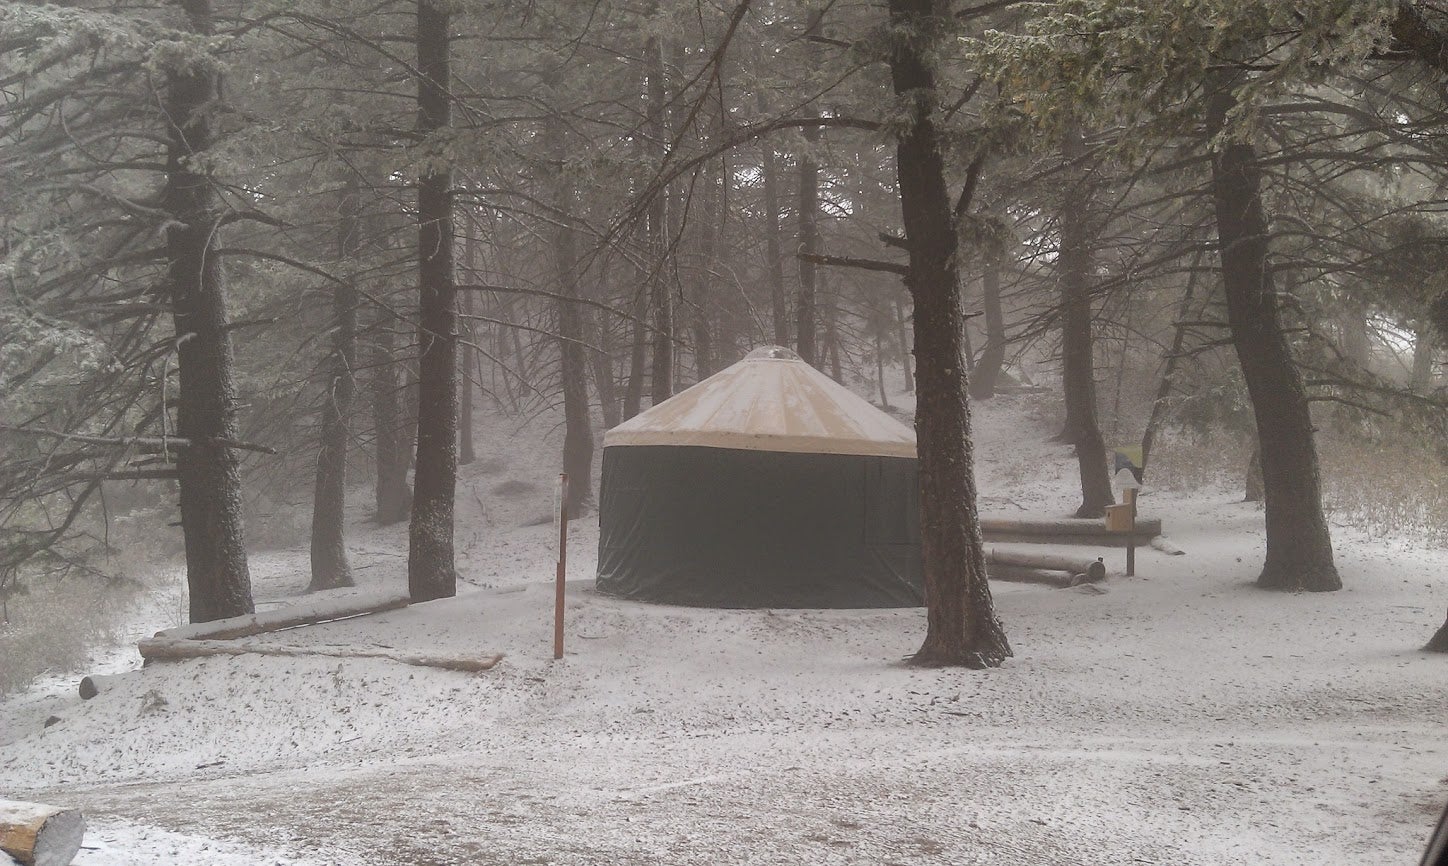 green yurt in the forest blanketed in a dusting of snow